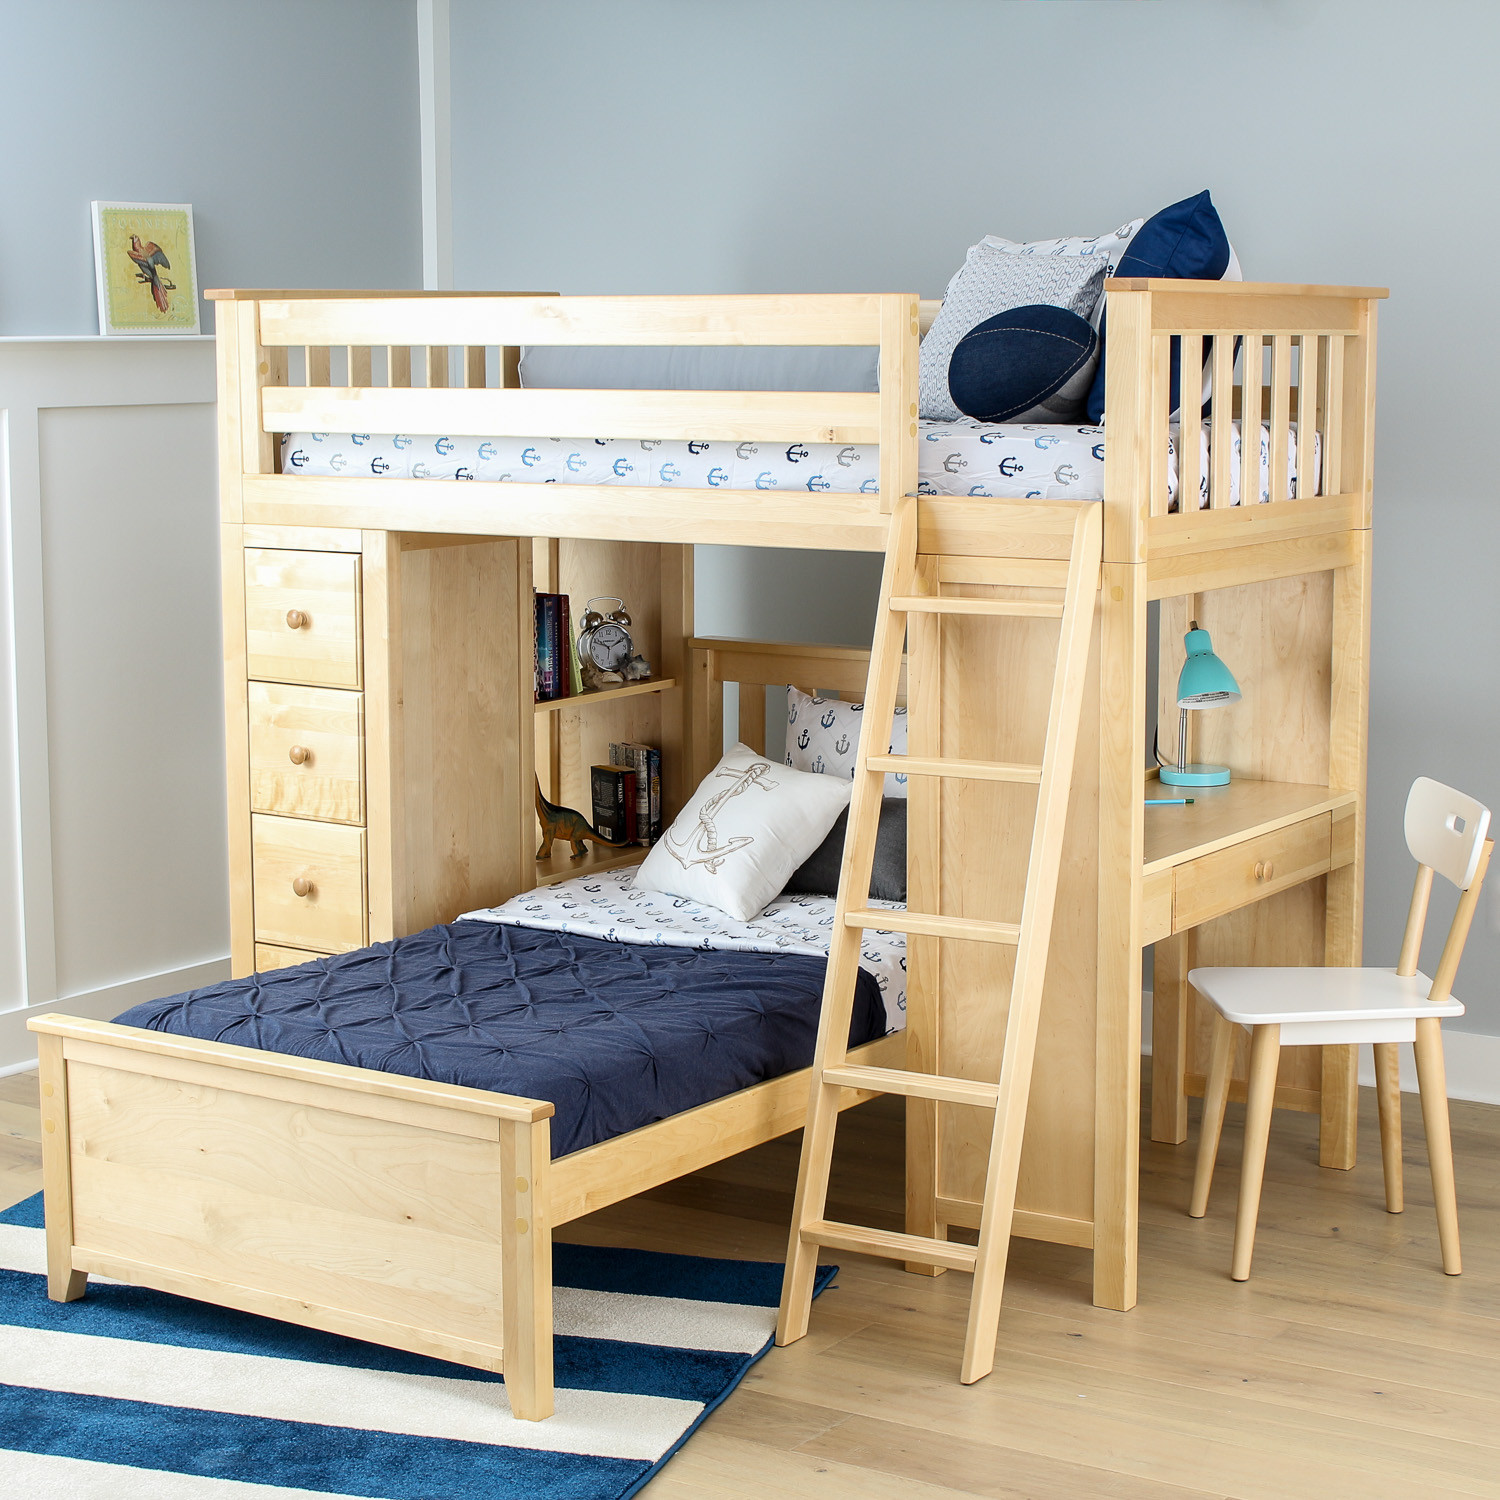 Kids Loft Bed With Storage
 All in e Loft Bed Storage Study Twin Bed Natural